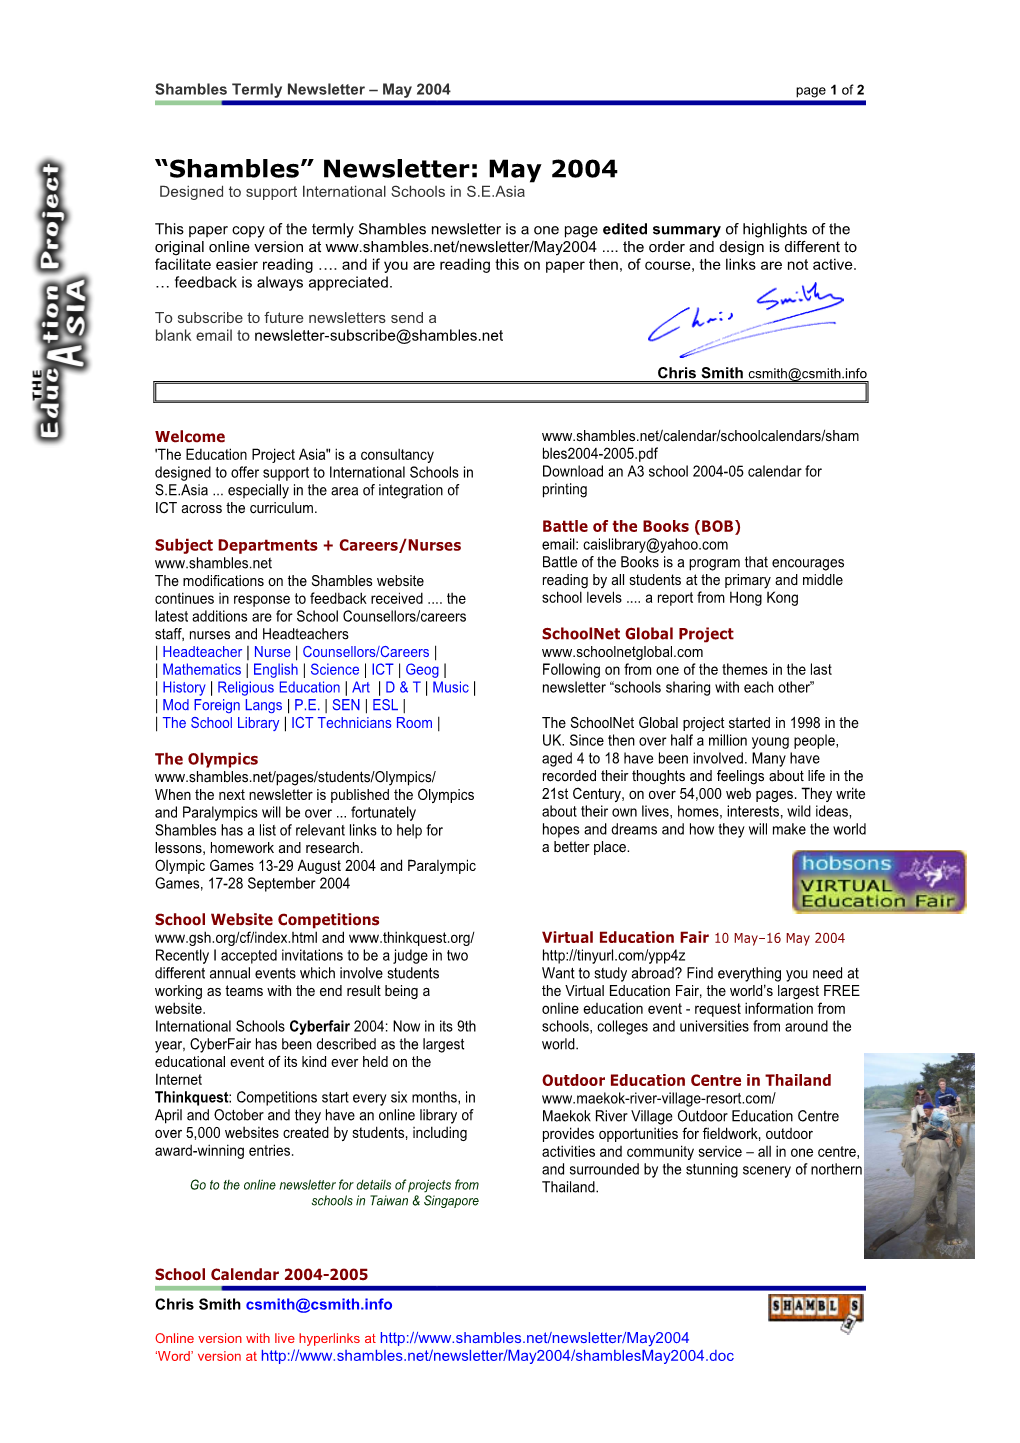 Shambles Termly Newsletter May 2004Page 1 of 2